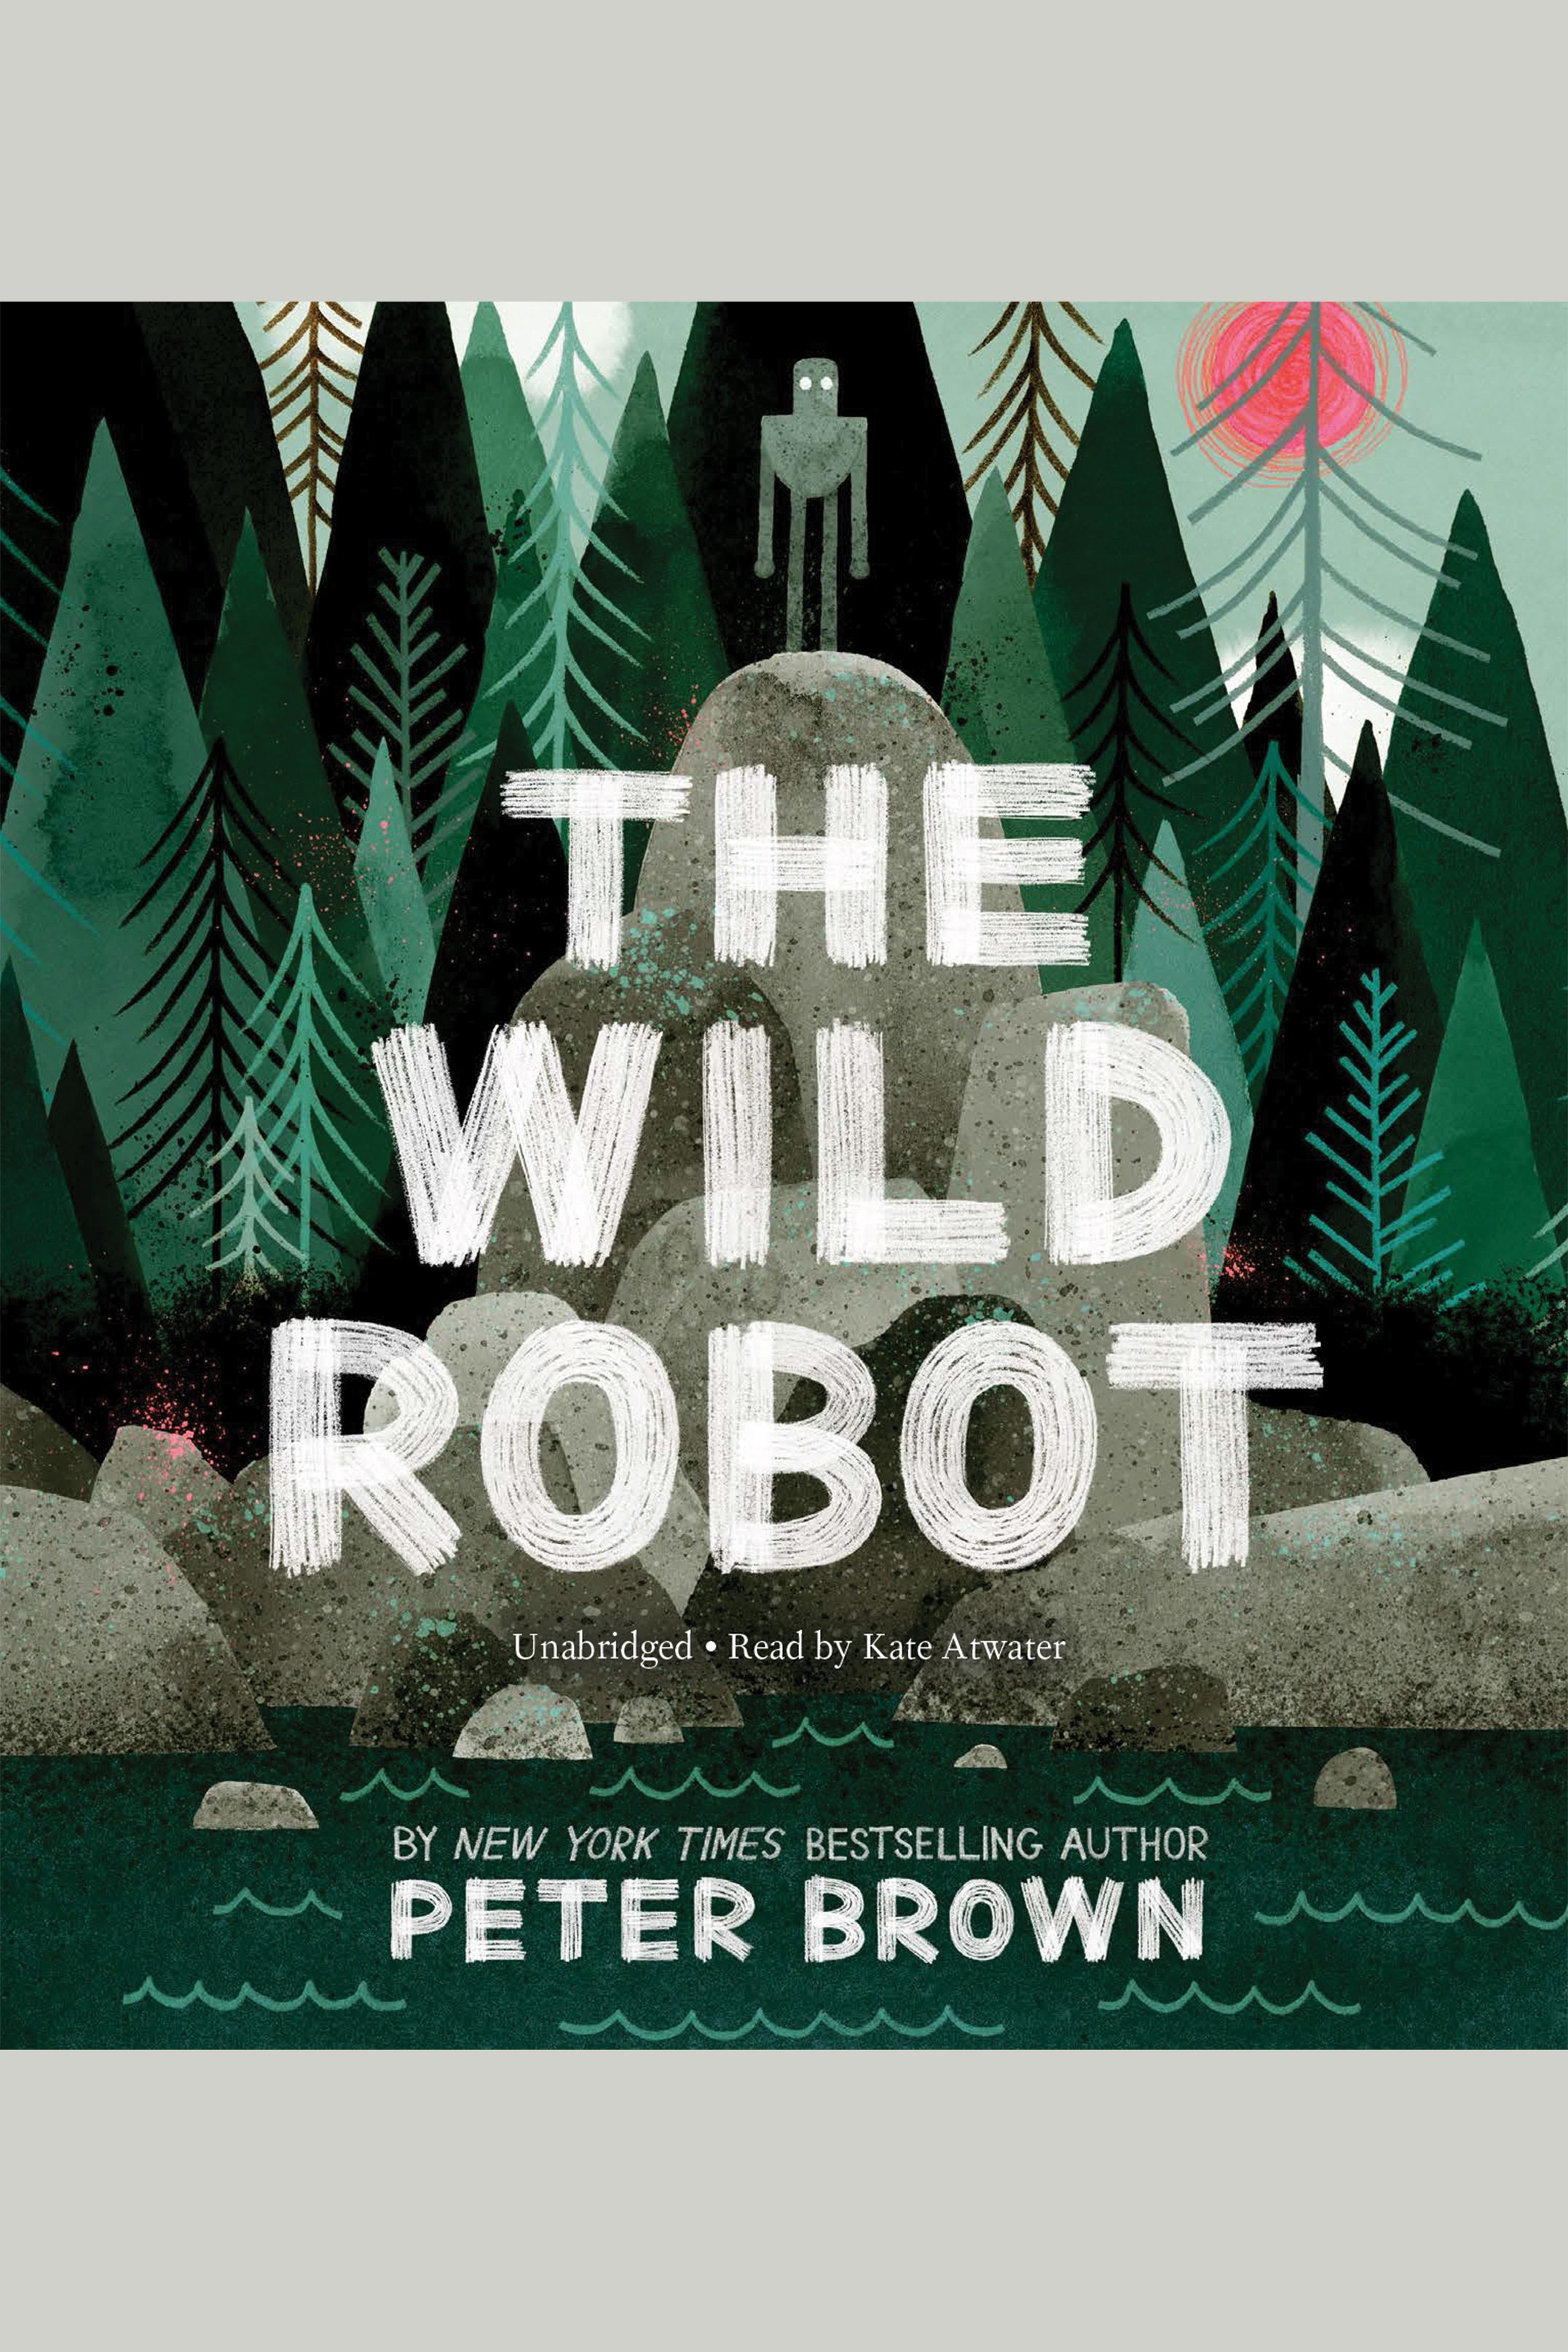 The wild robot cover image